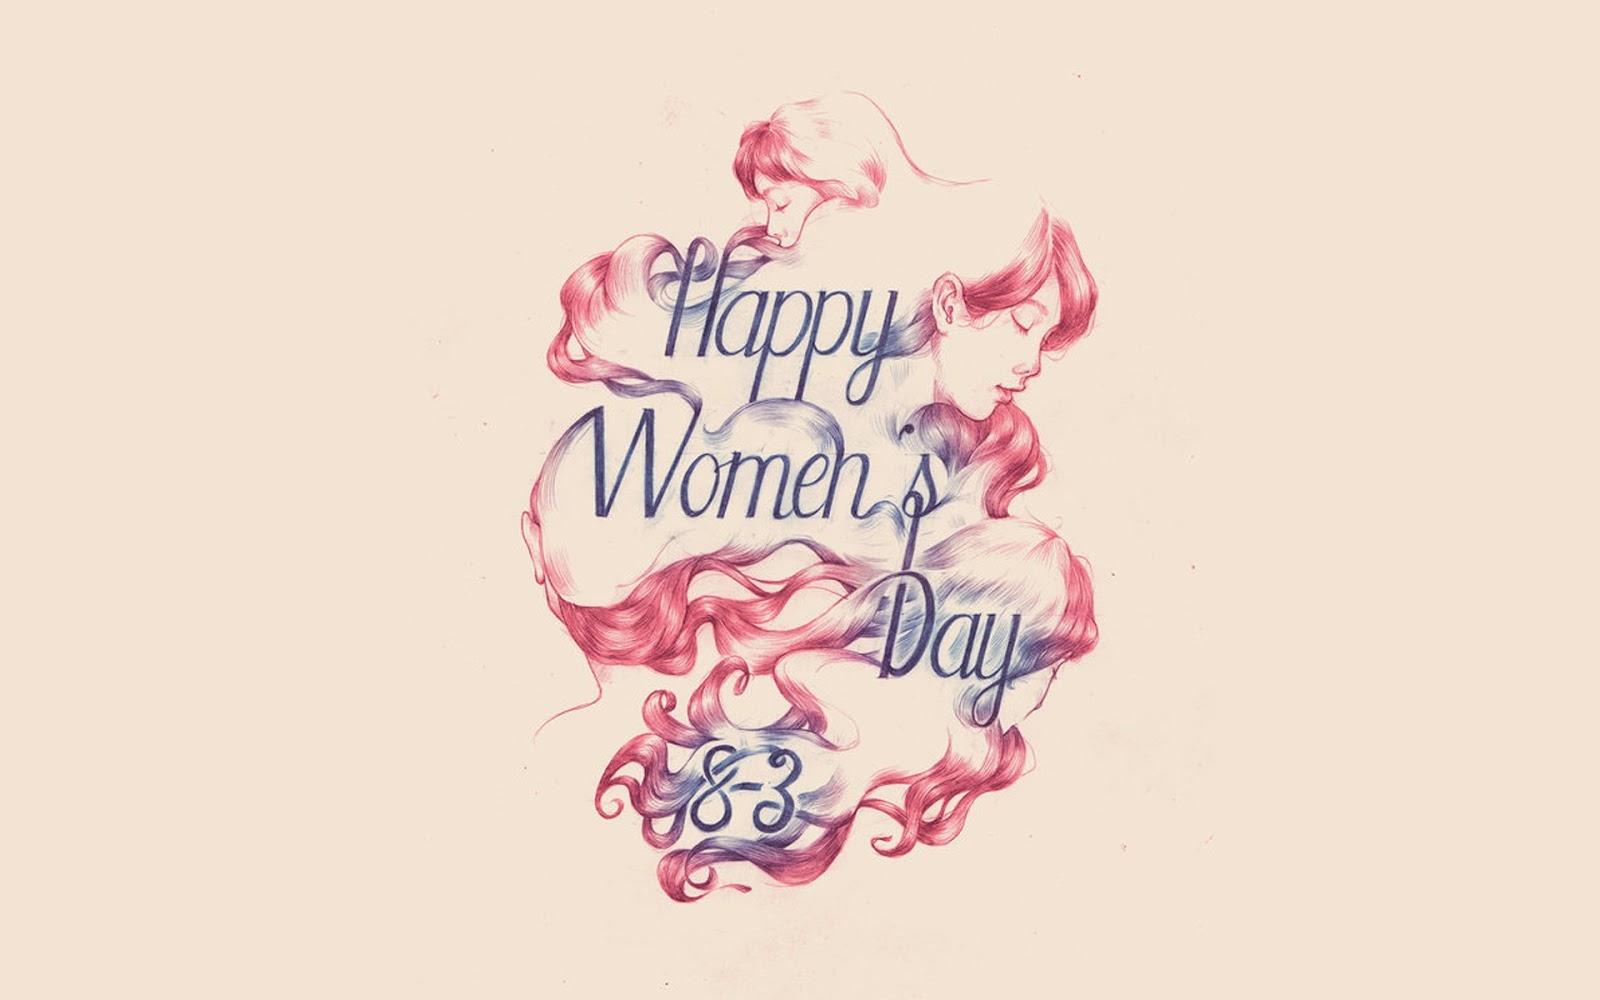 Best Happy Womans Day SMS 2018